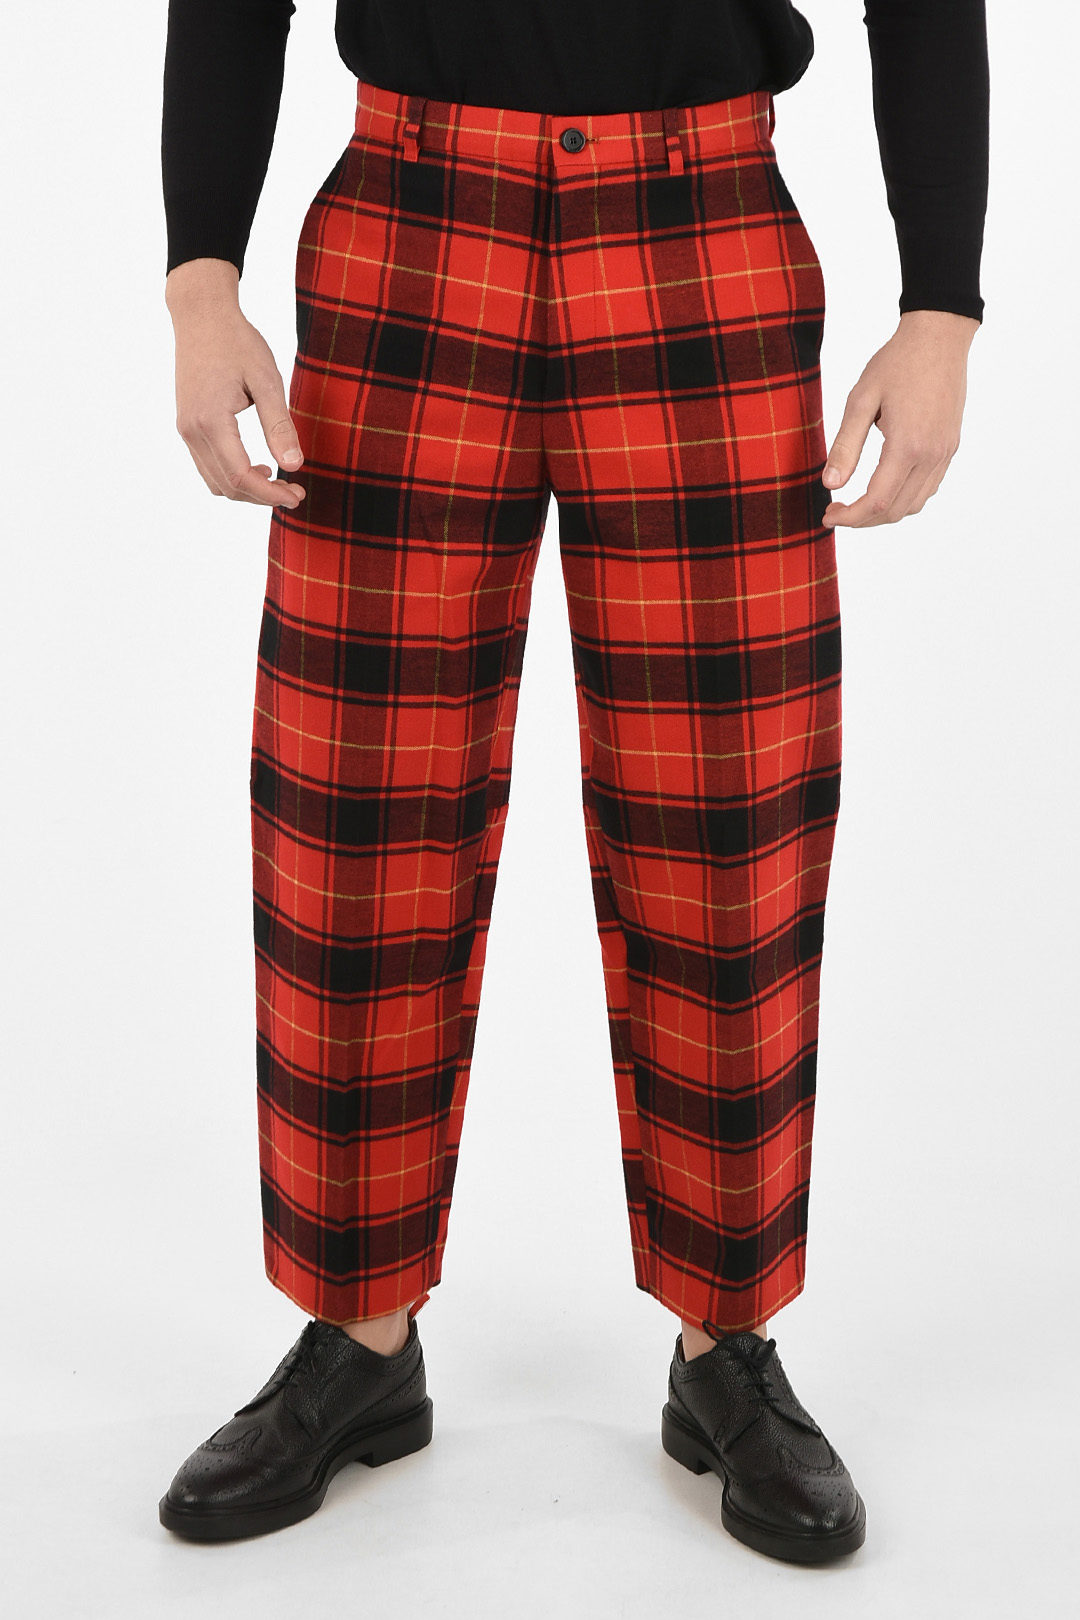 Hell Bunny Irvine 50s Cigarette Capri Cropped Trousers Retro Punk Tartan -  Red (XS) at Amazon Women's Clothing store